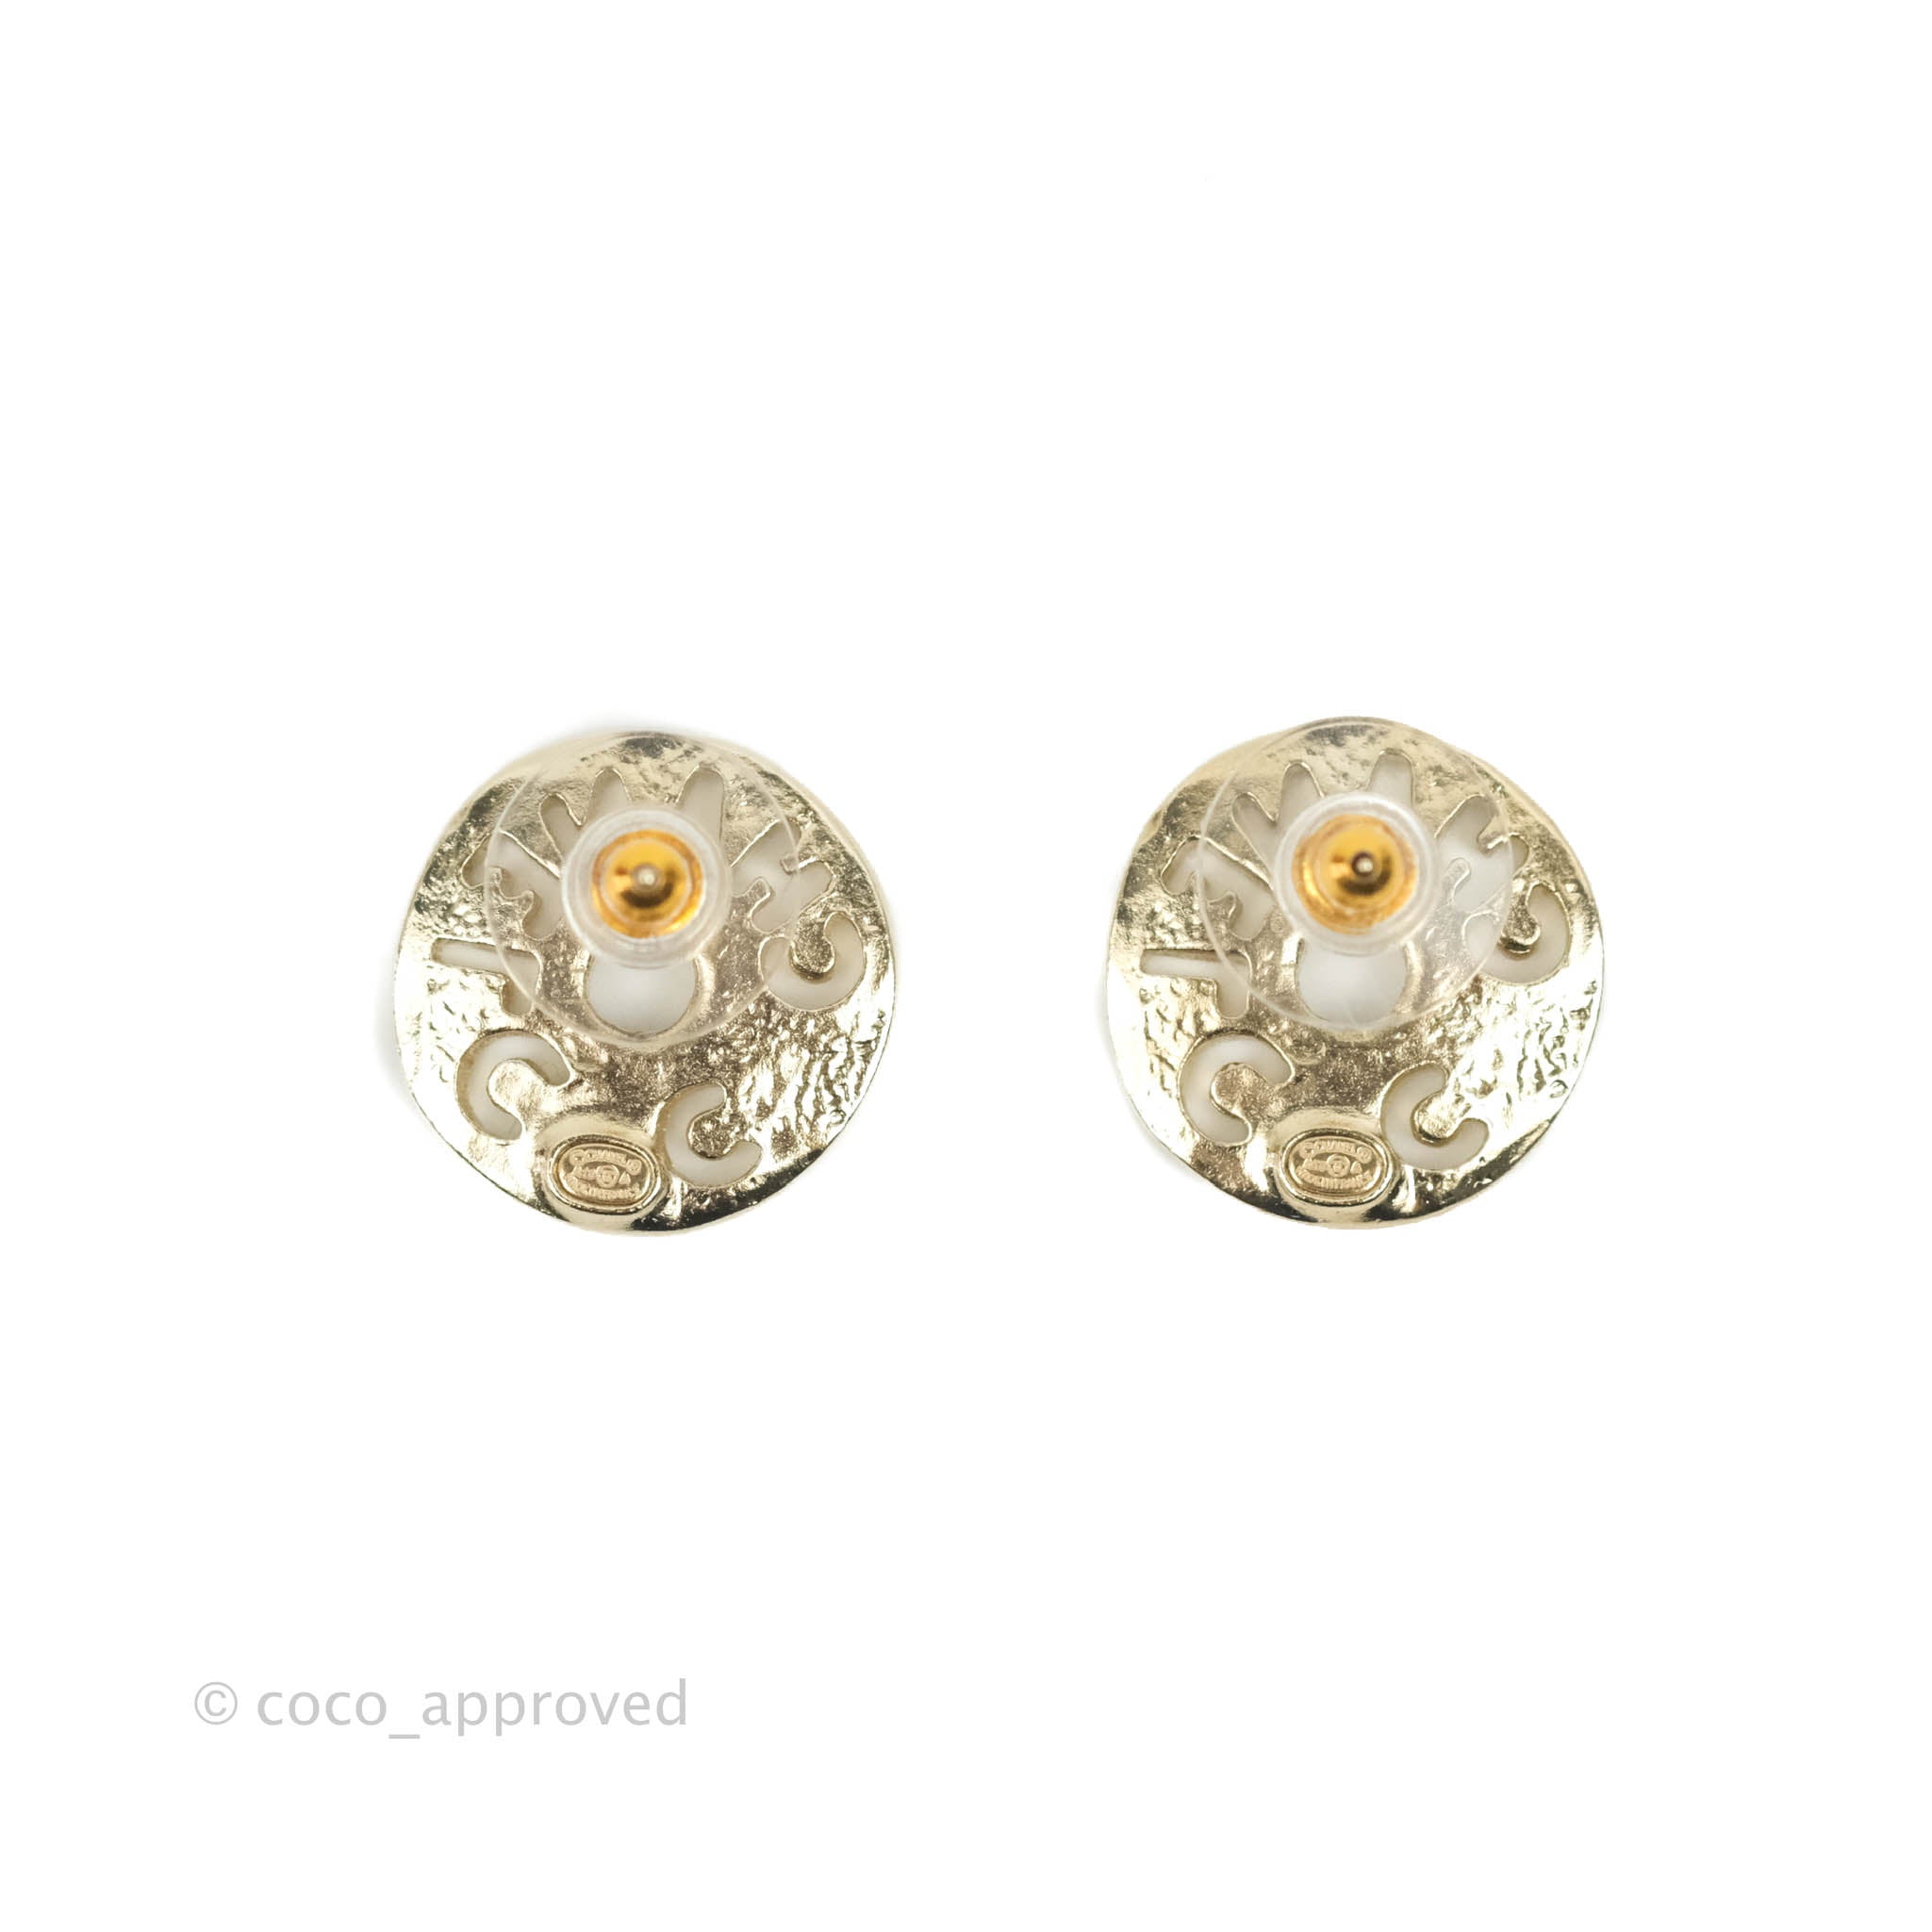 Chanel Egypt Coco Chanel Cutout Crystal Stud Earrings 19A – Coco